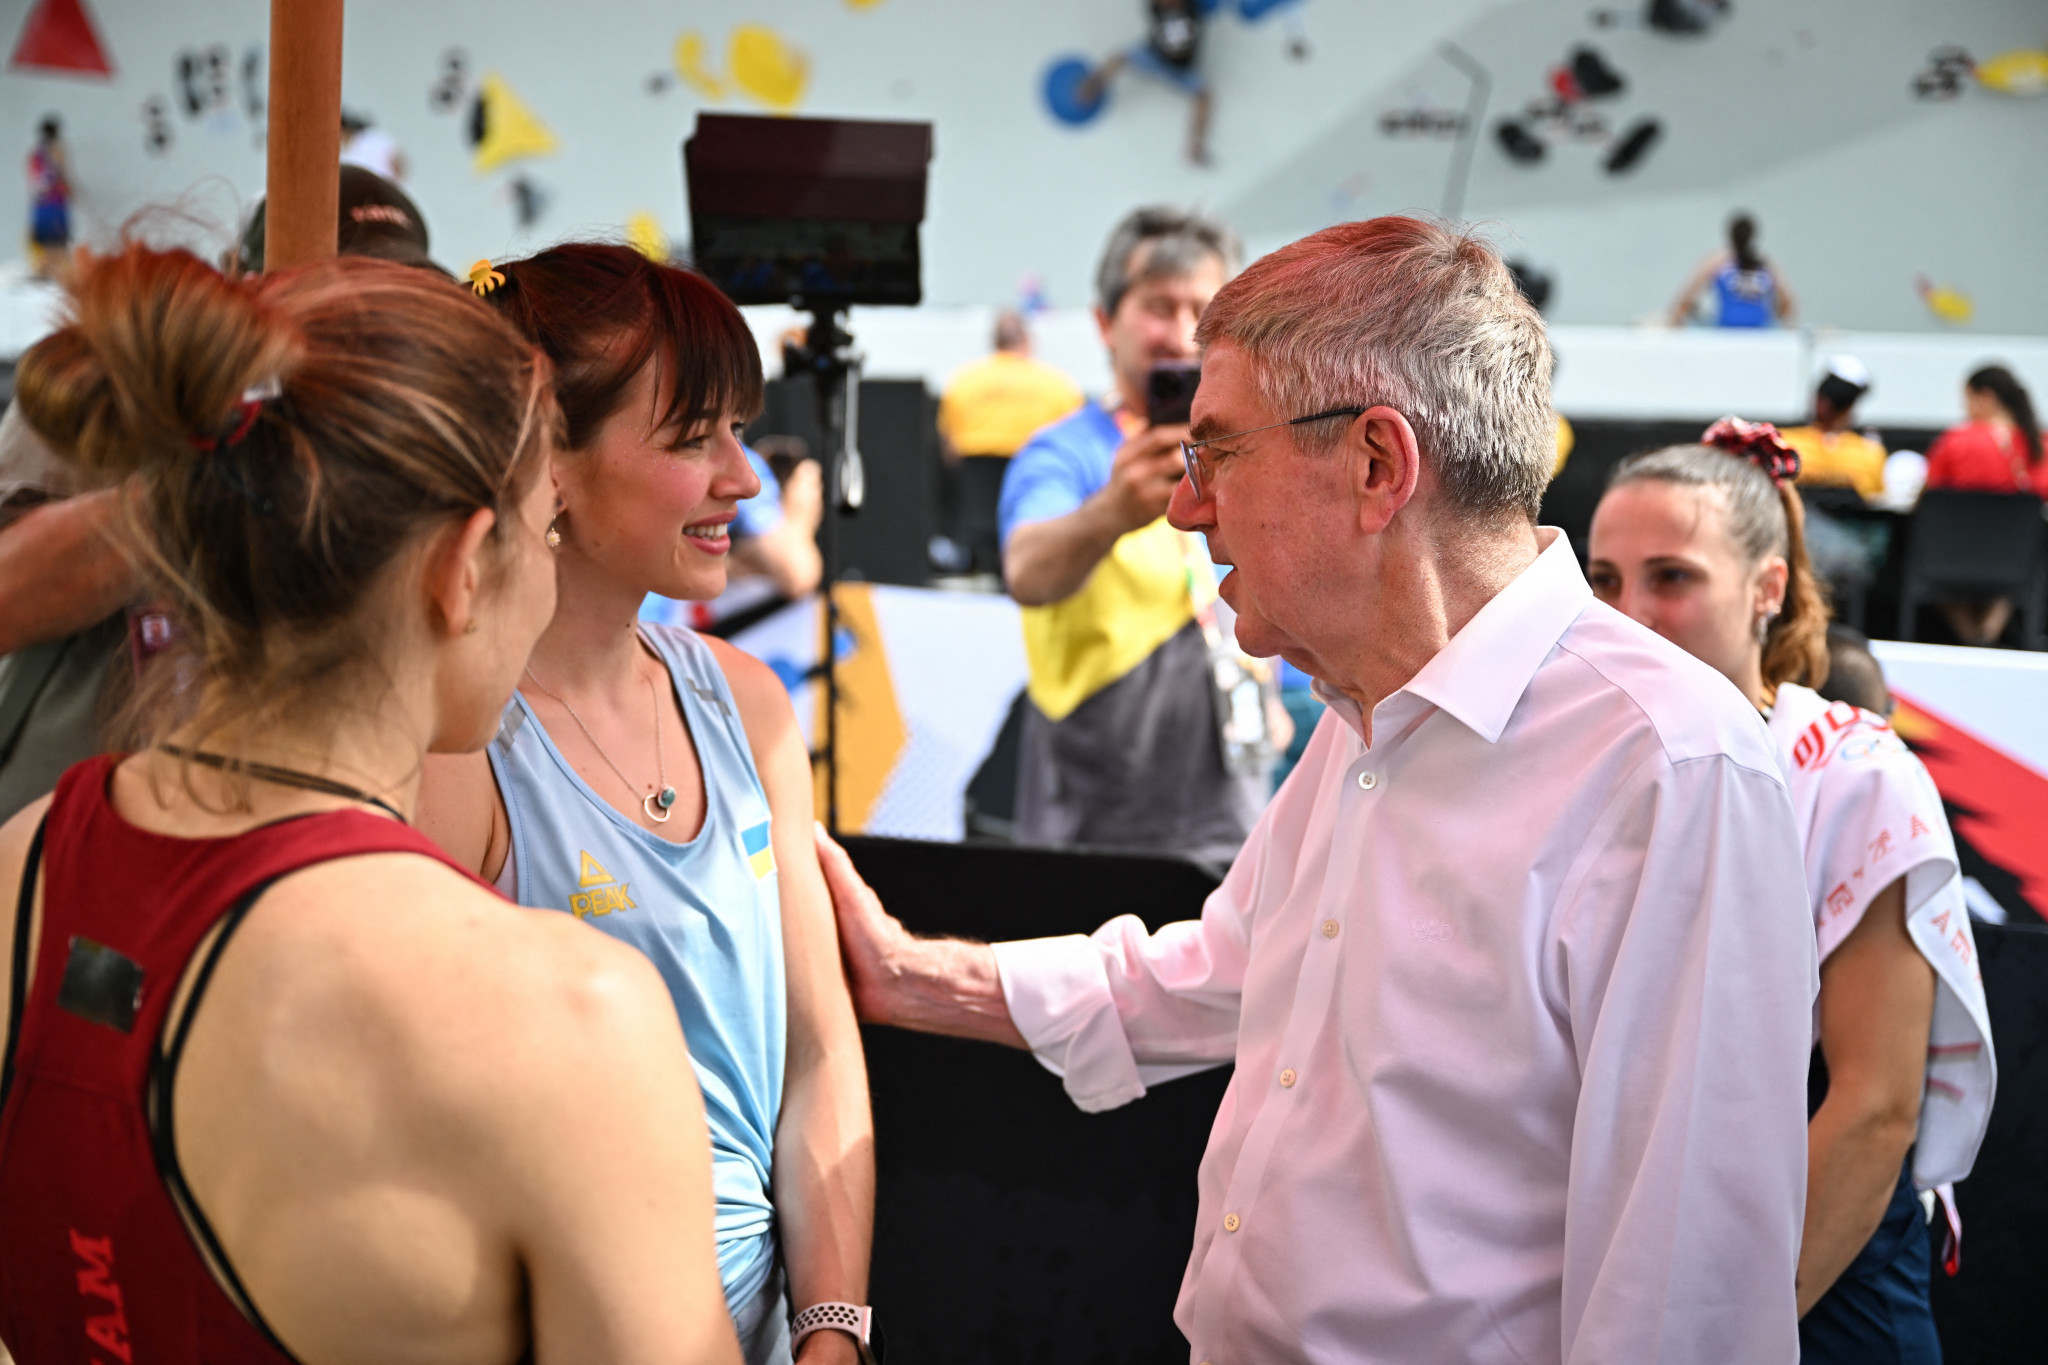 The 27-year-old, being greeted by IOC President Thomas Bach, will compete in the boulder and lead events in Paris. GETTY IMAGES